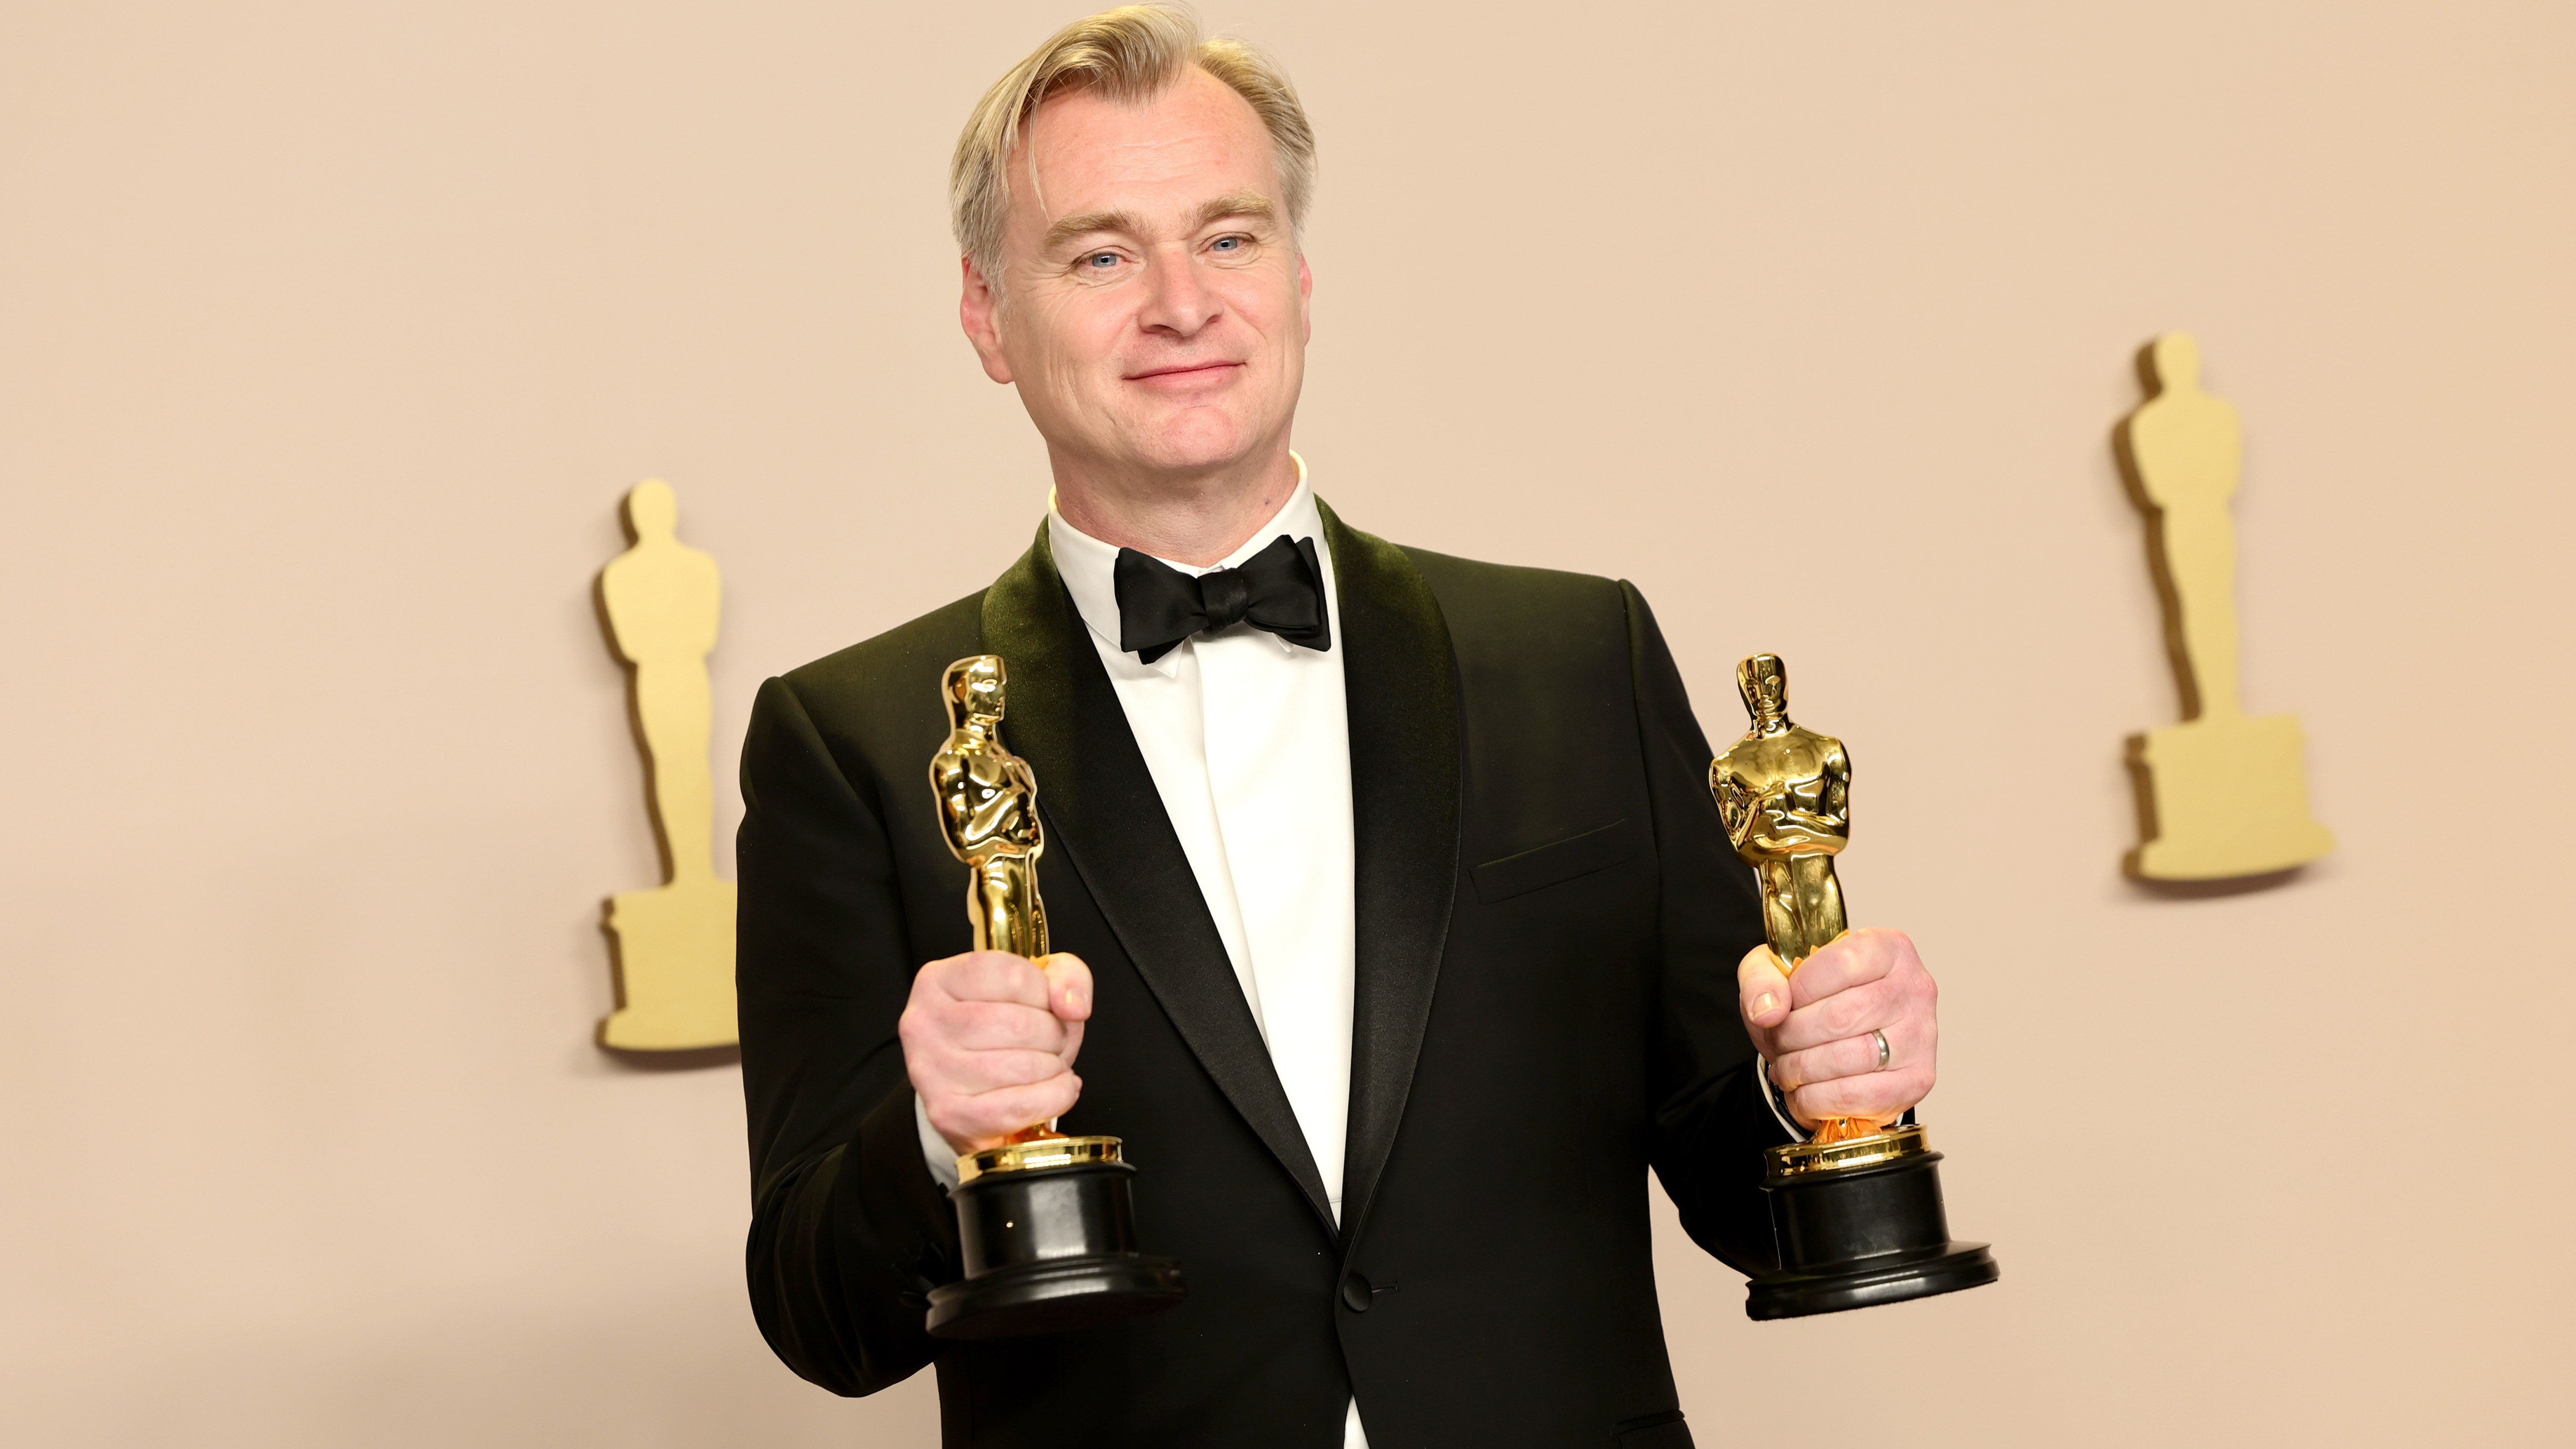 Christopher Nolan won best director and best picture awards at this year’s Oscars